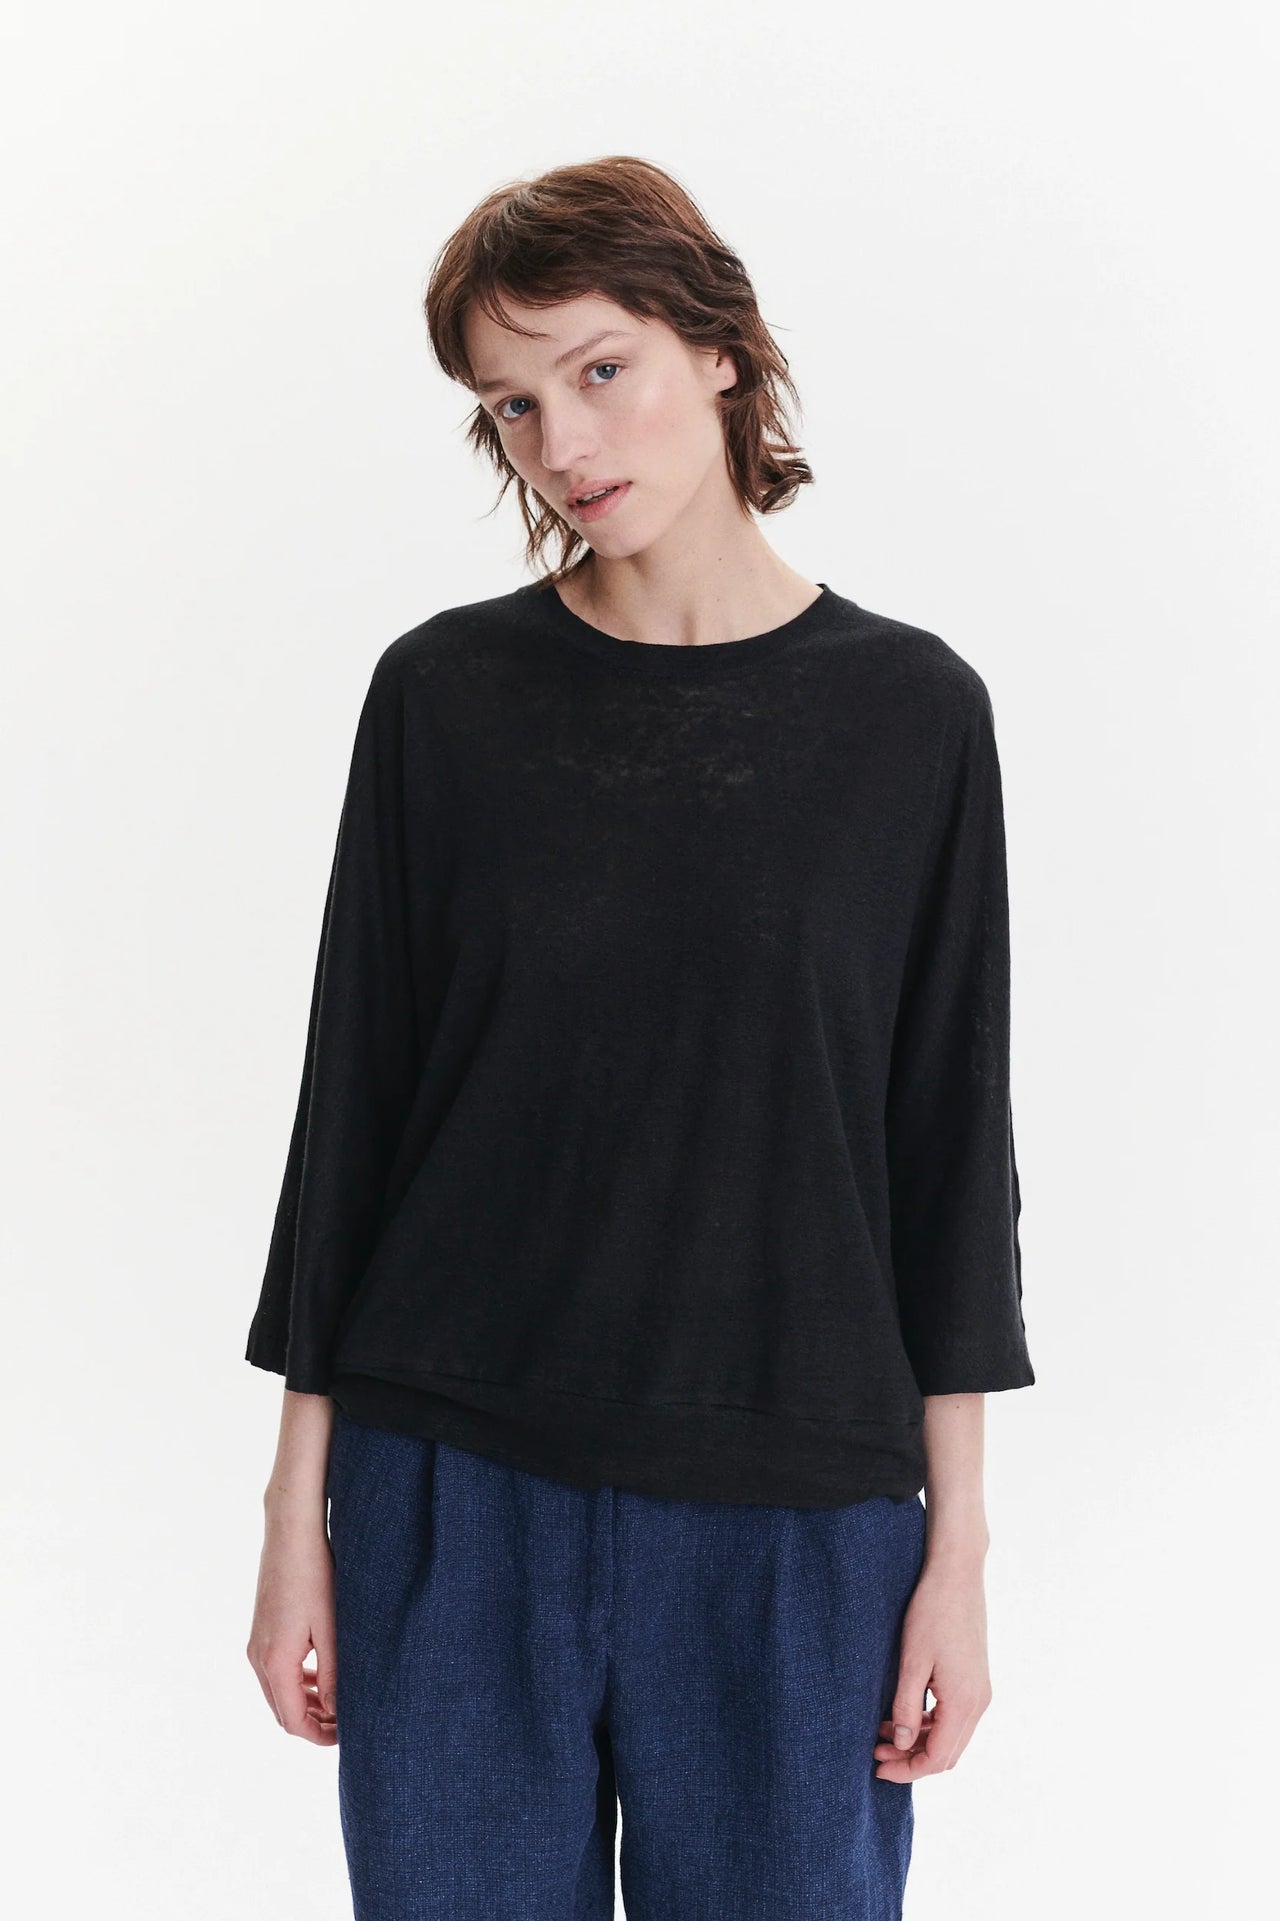 Threequarter Sleeve Top in the Finest Black Lithuanian Linen Jersey